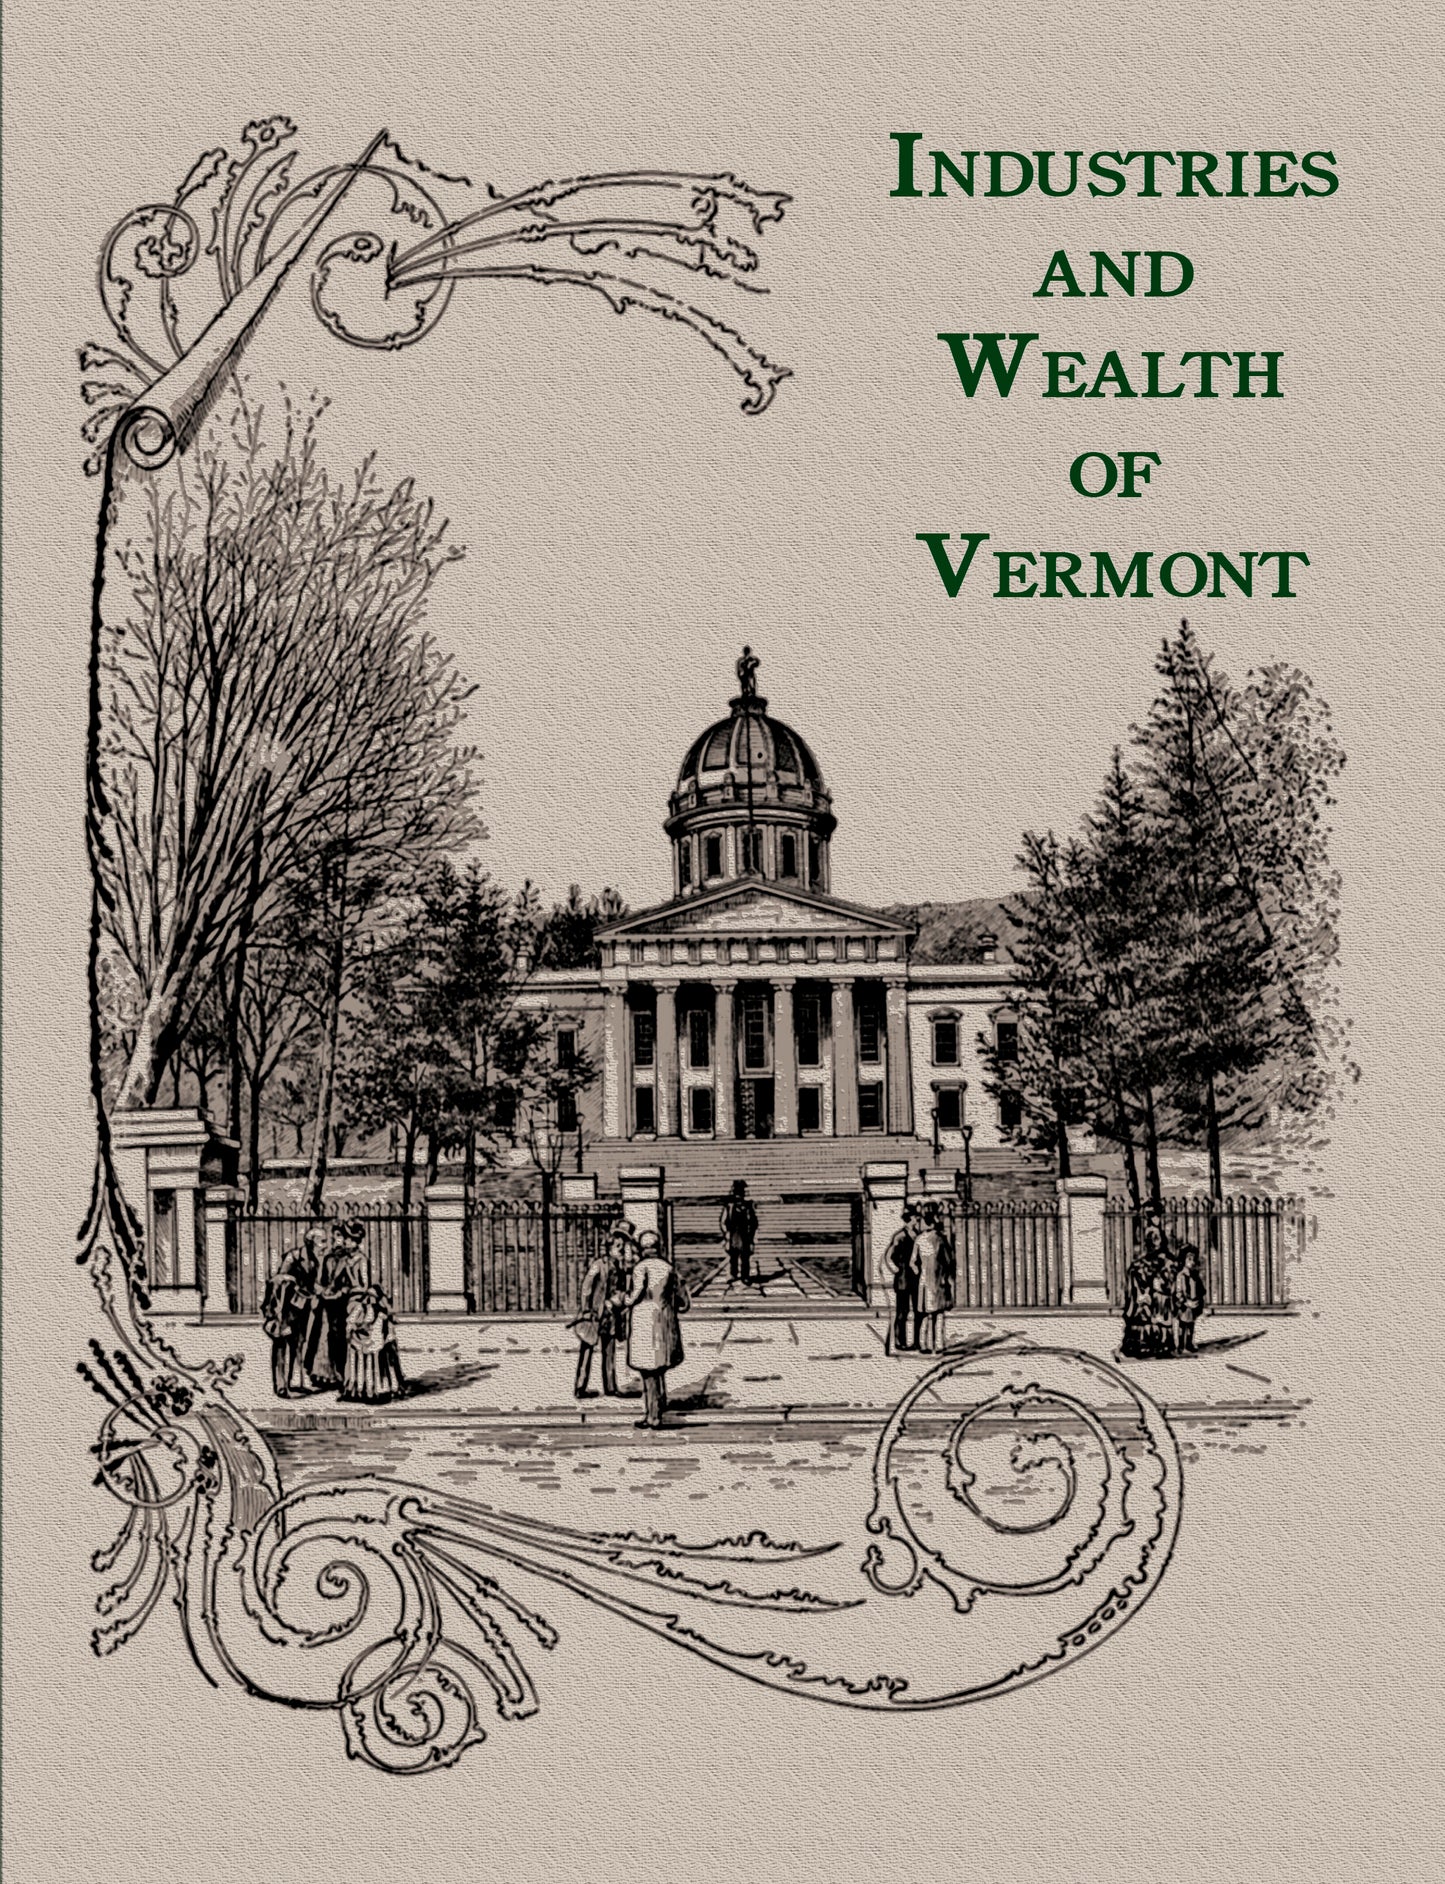 Industries and Wealth of Vermont